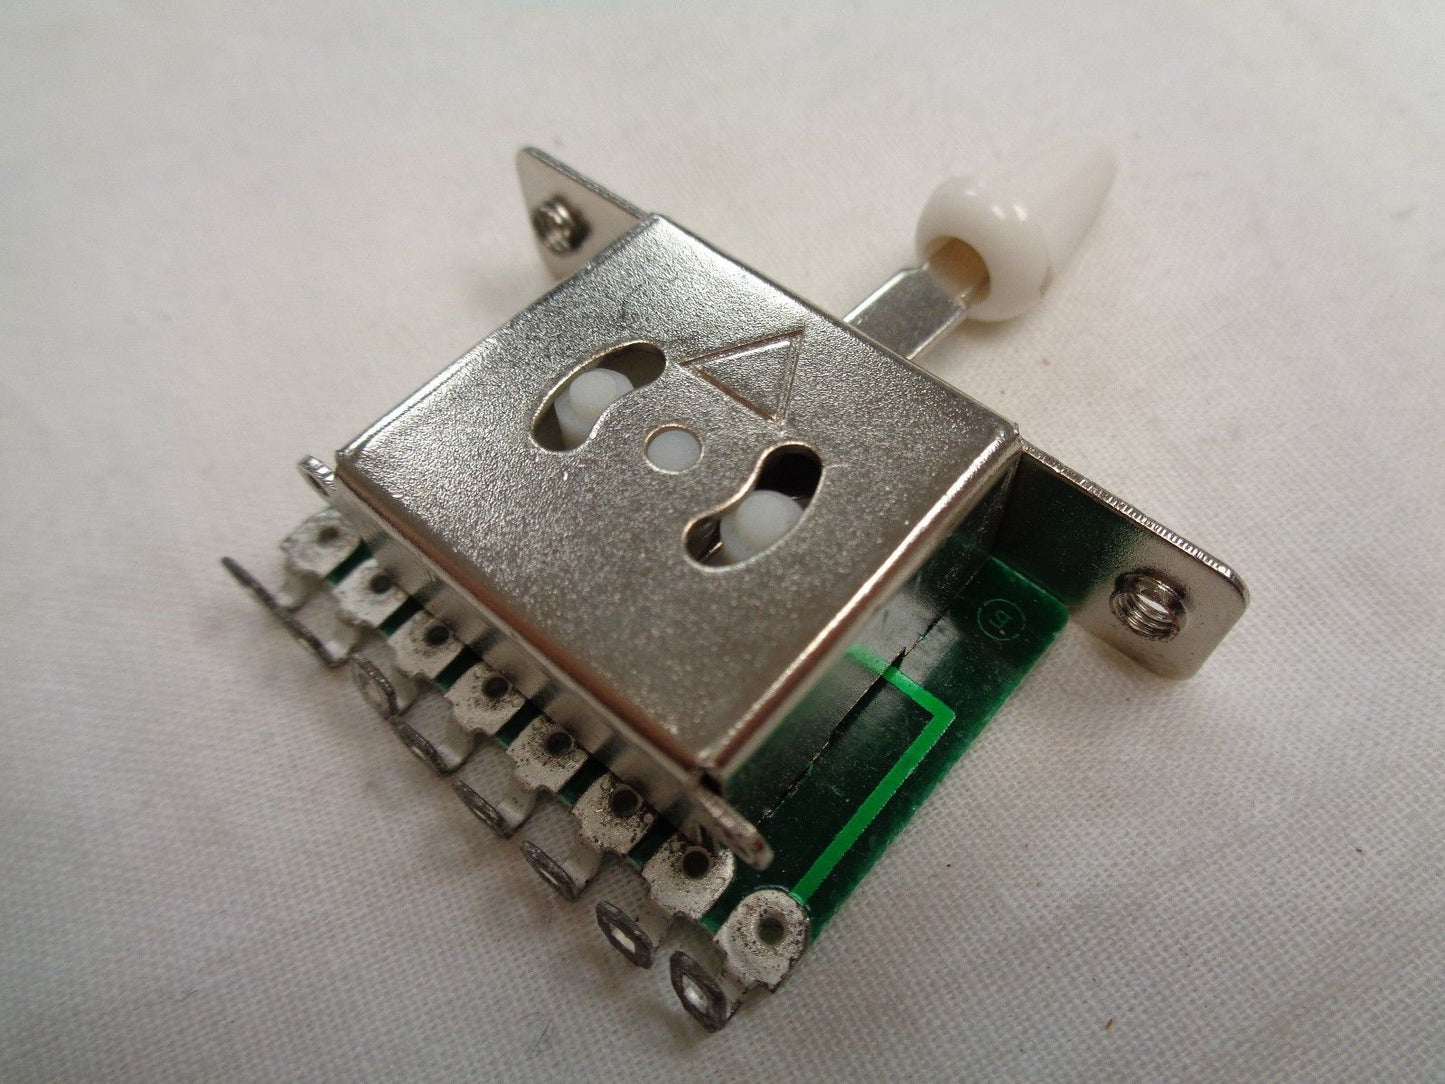 5-Way Switch with white cap